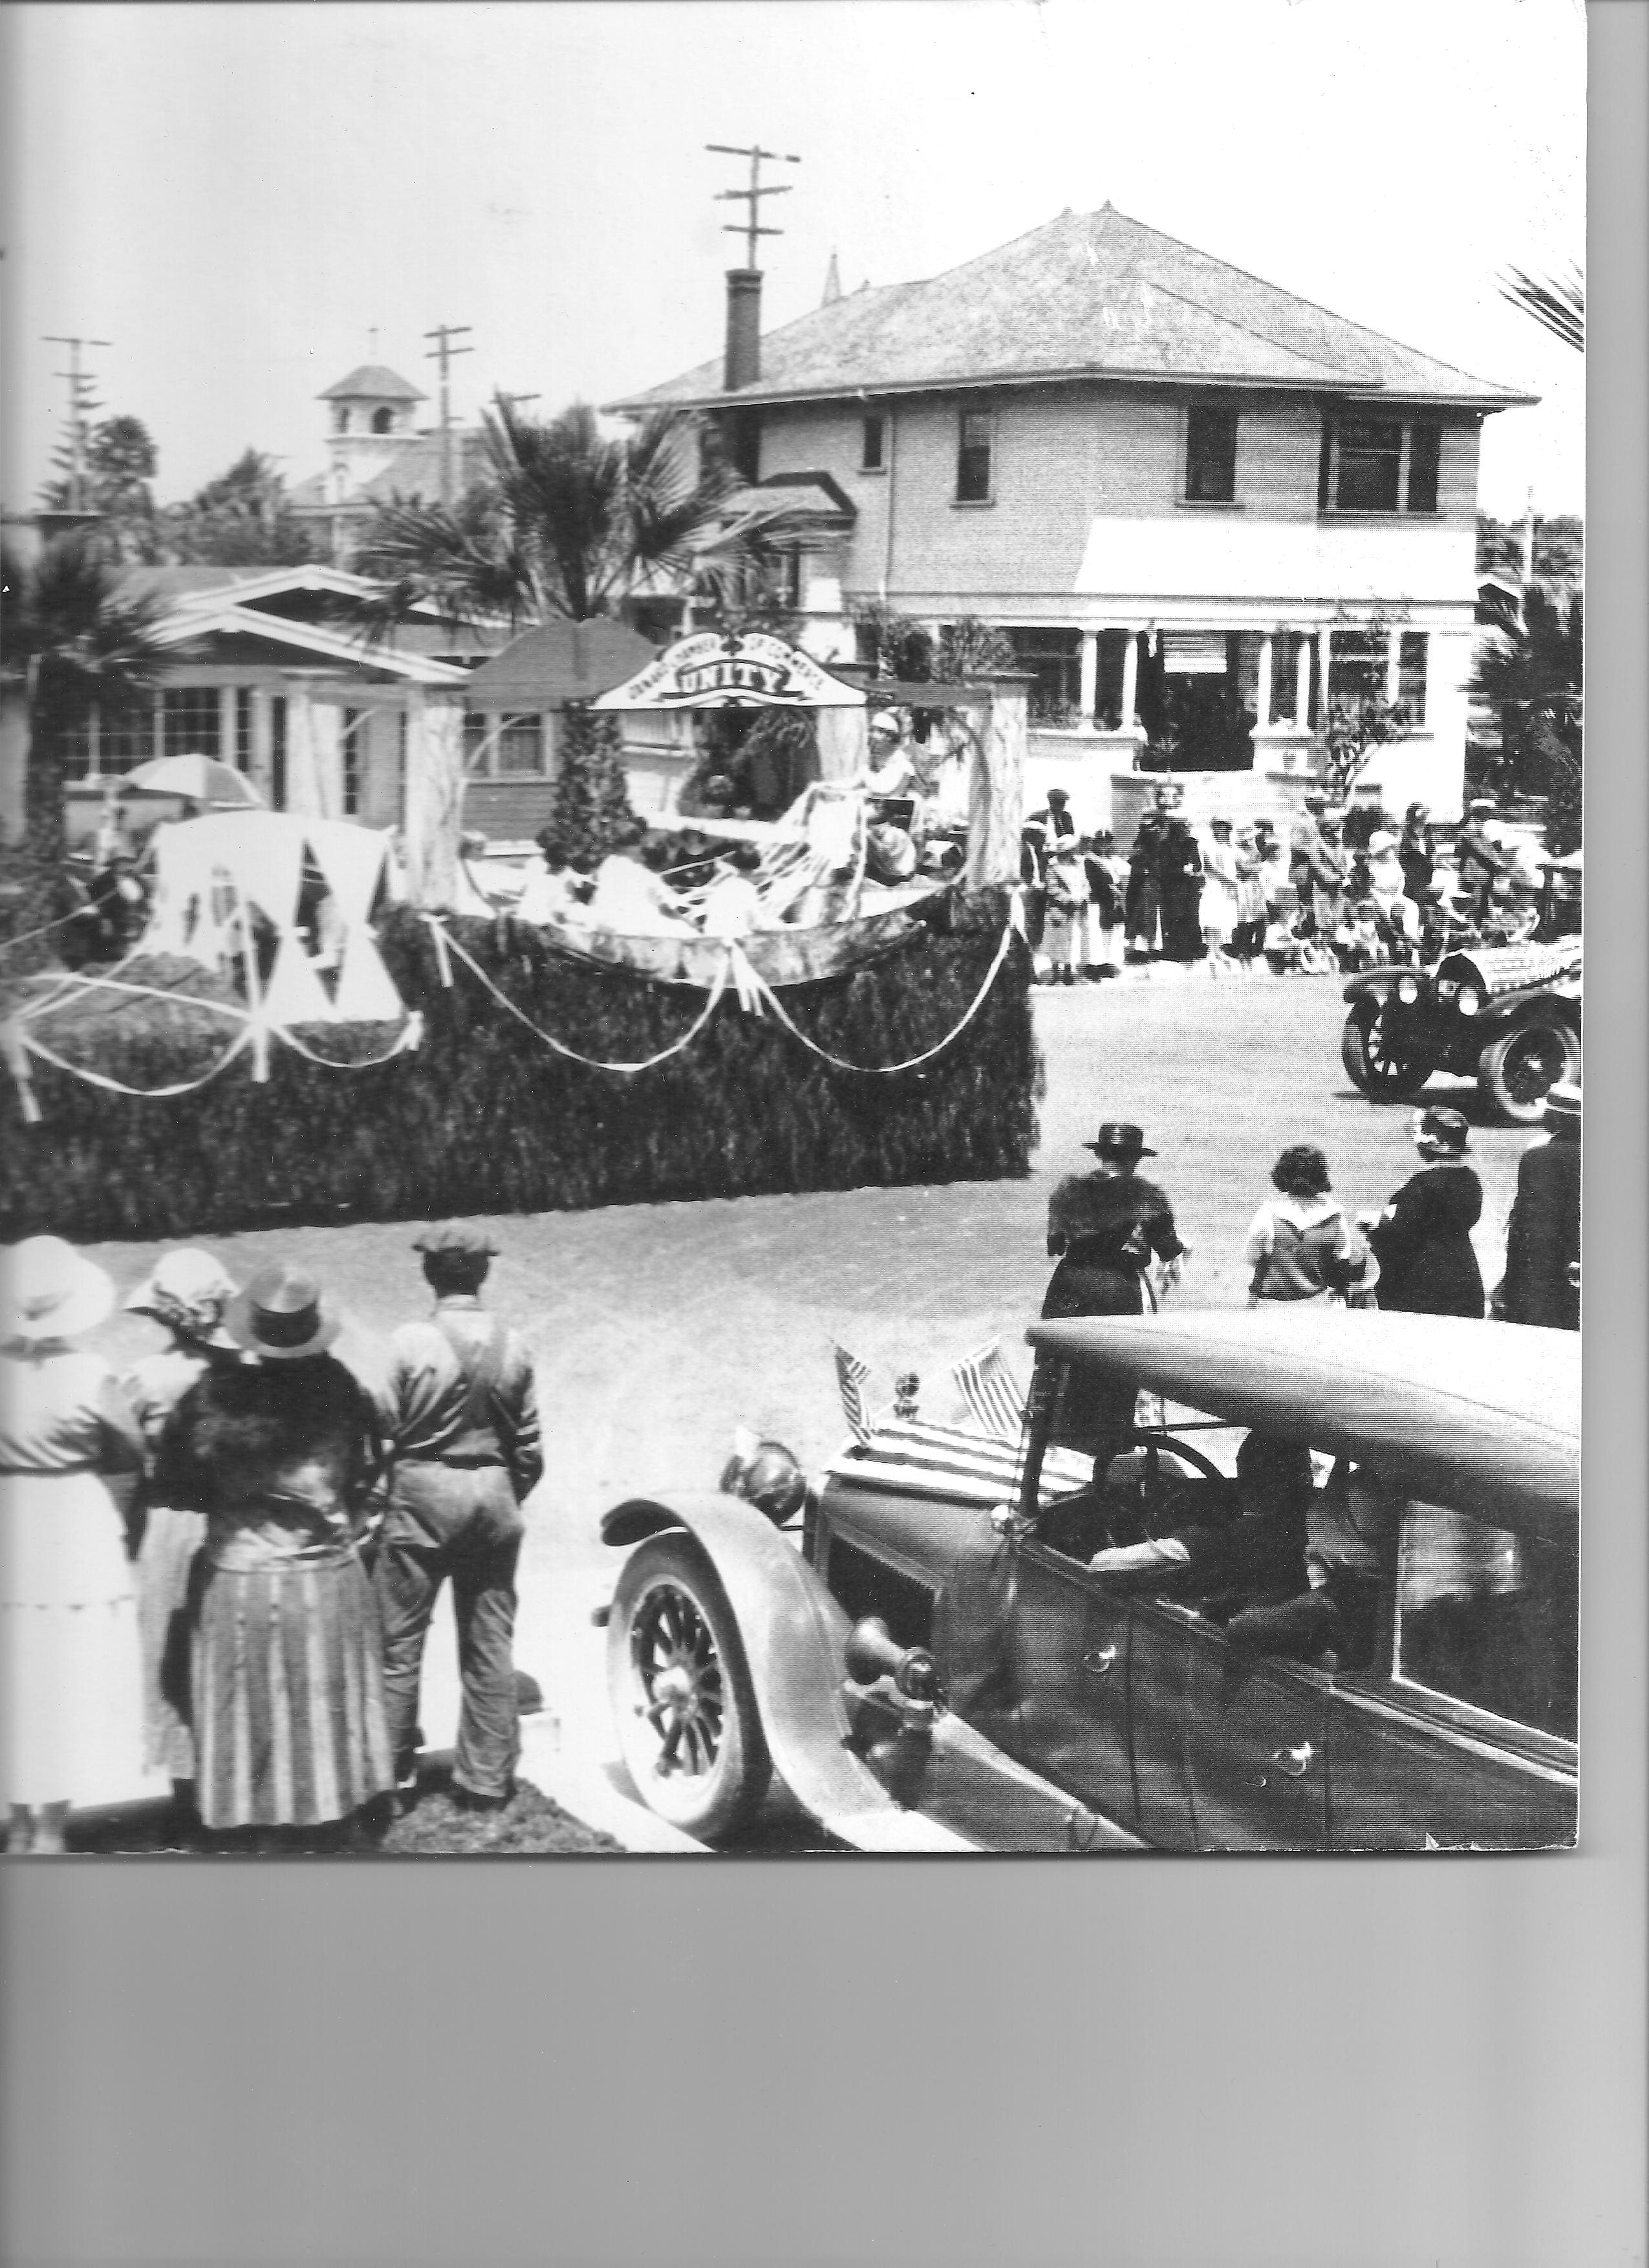 Historical black and white photograph of a parade with spectators and vintage cars, featuring a decorated float and nearby buildings.